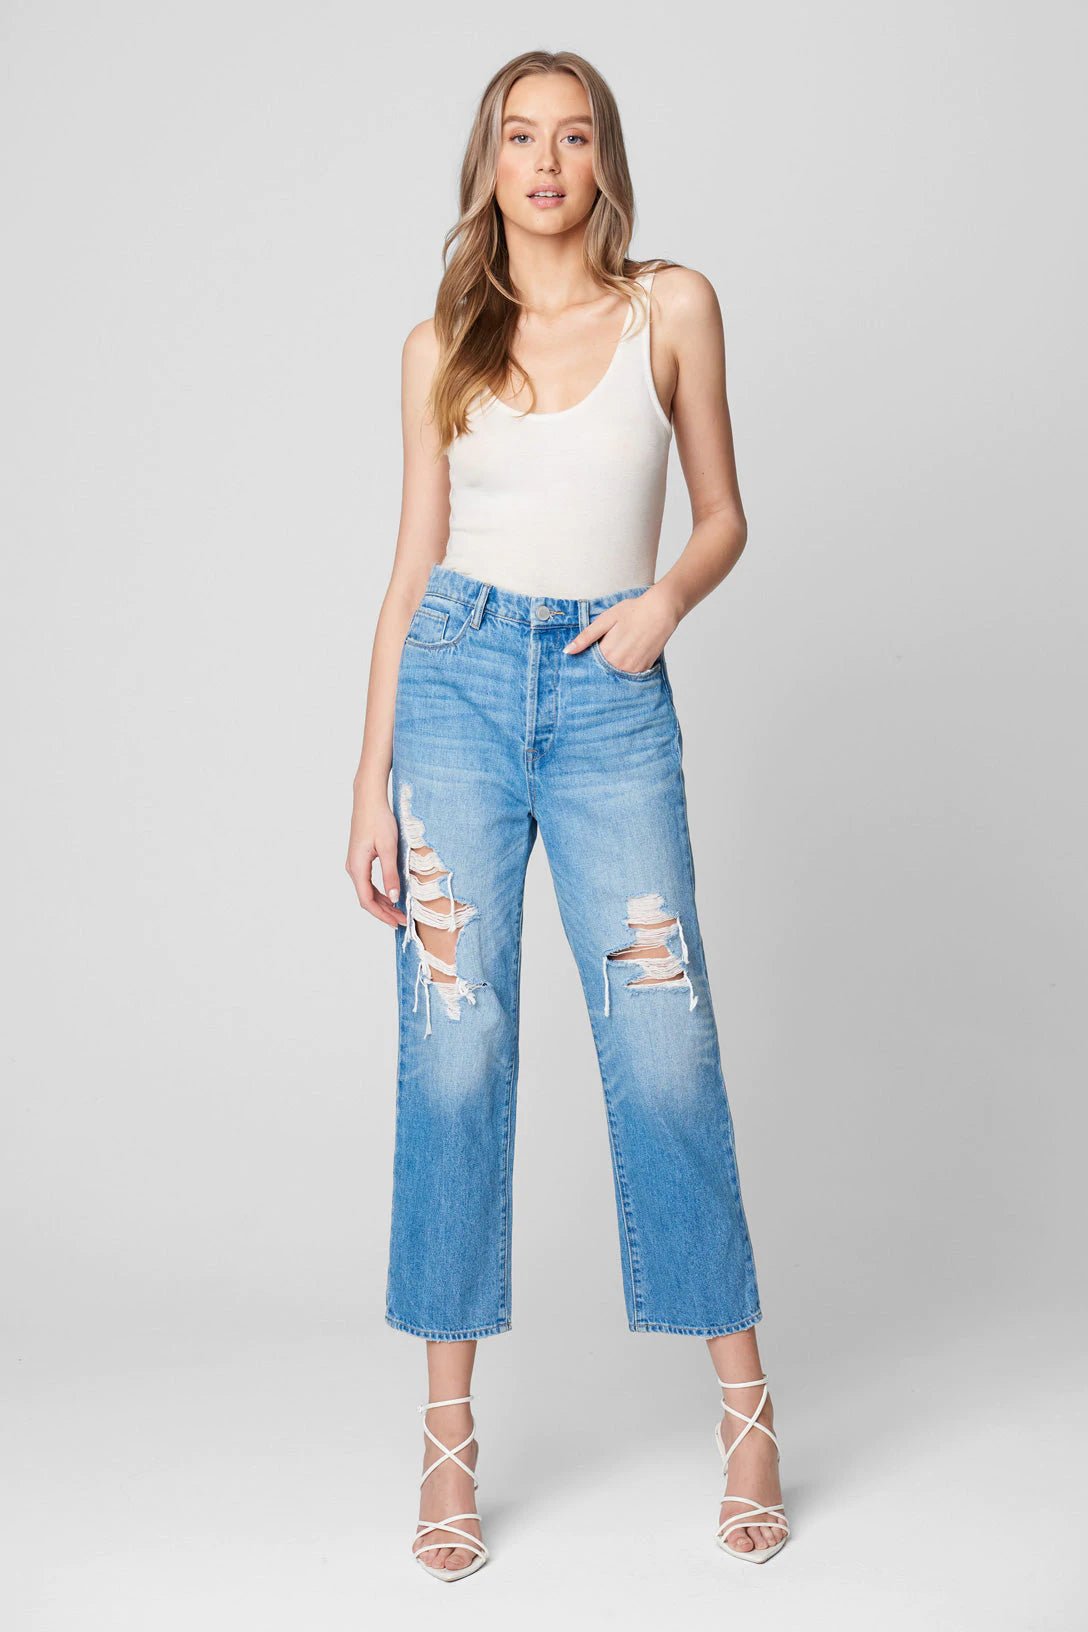 Blank NYC Baxter Ribcage Straight Leg in Loosen UpJeans